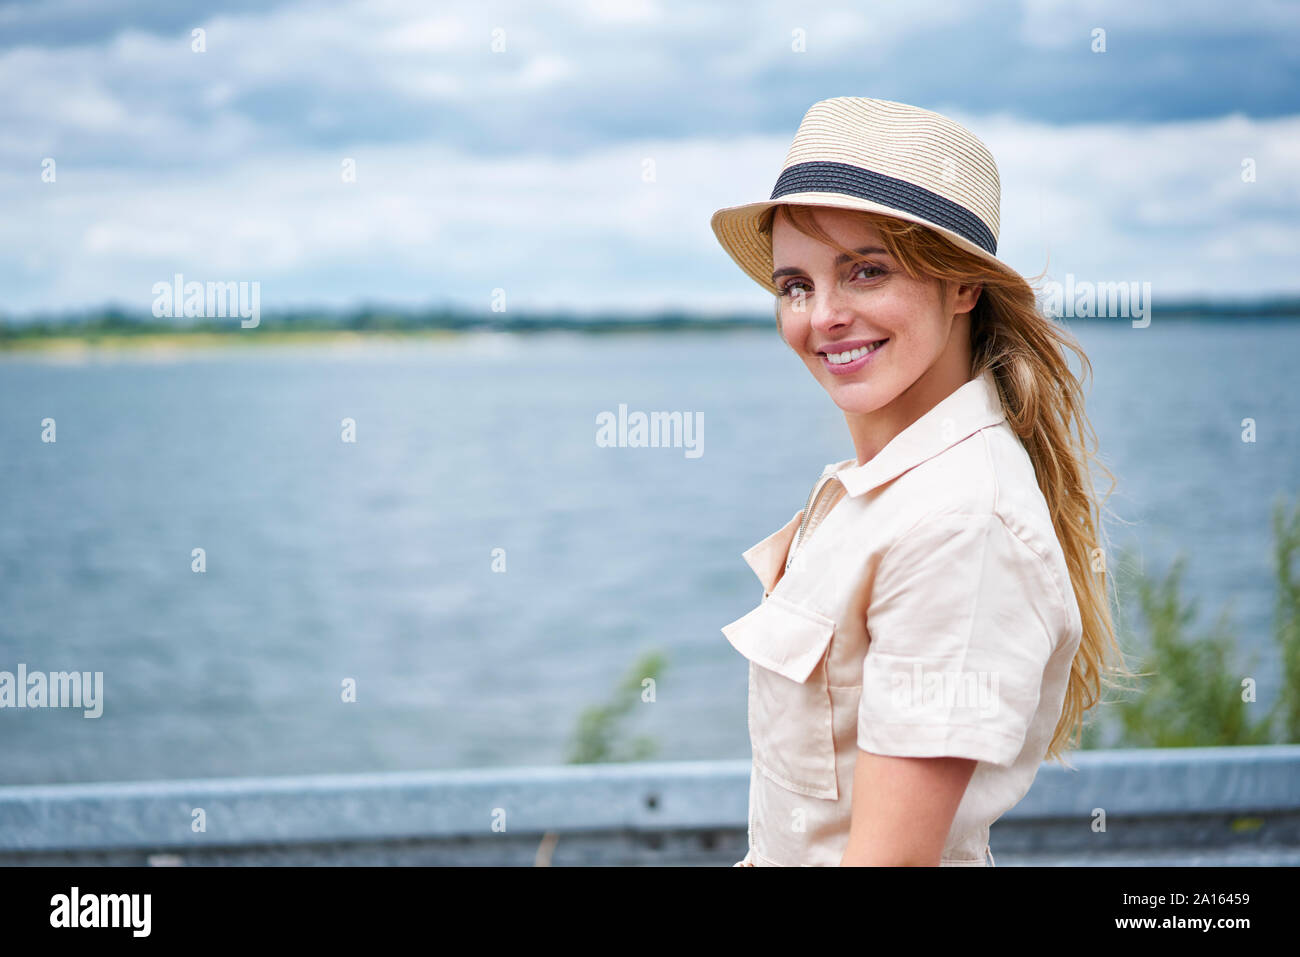 Portrait of smiling woman with hat at the lakeside Stock Photo